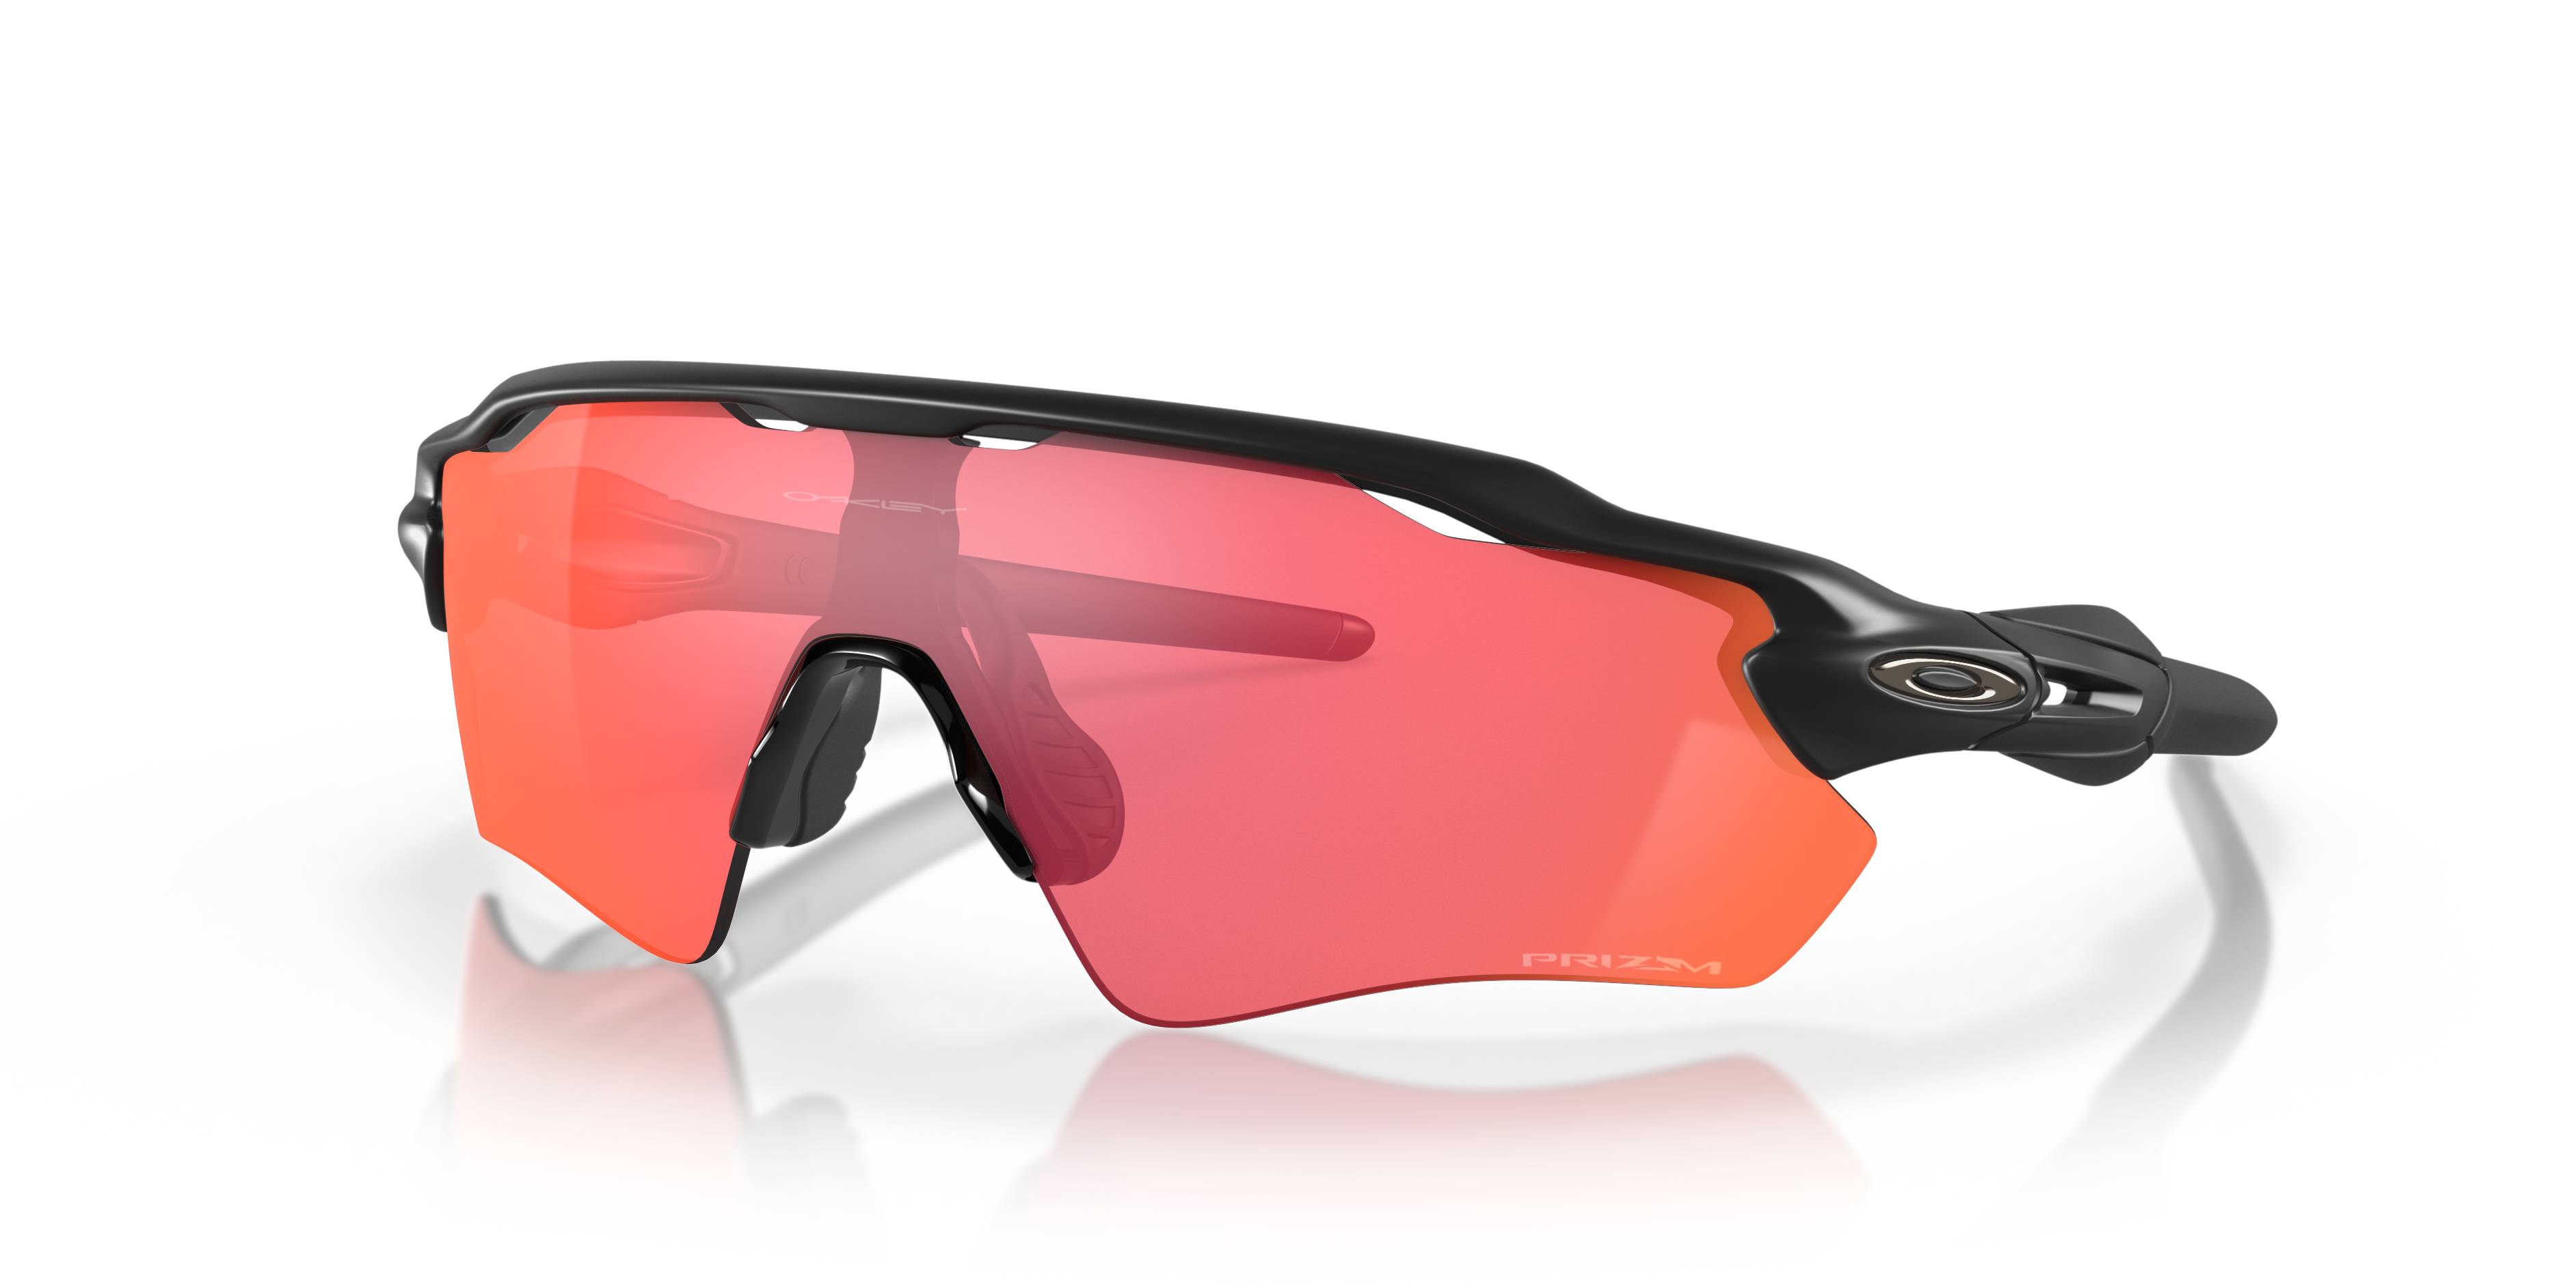 oakley sunglasses black and red